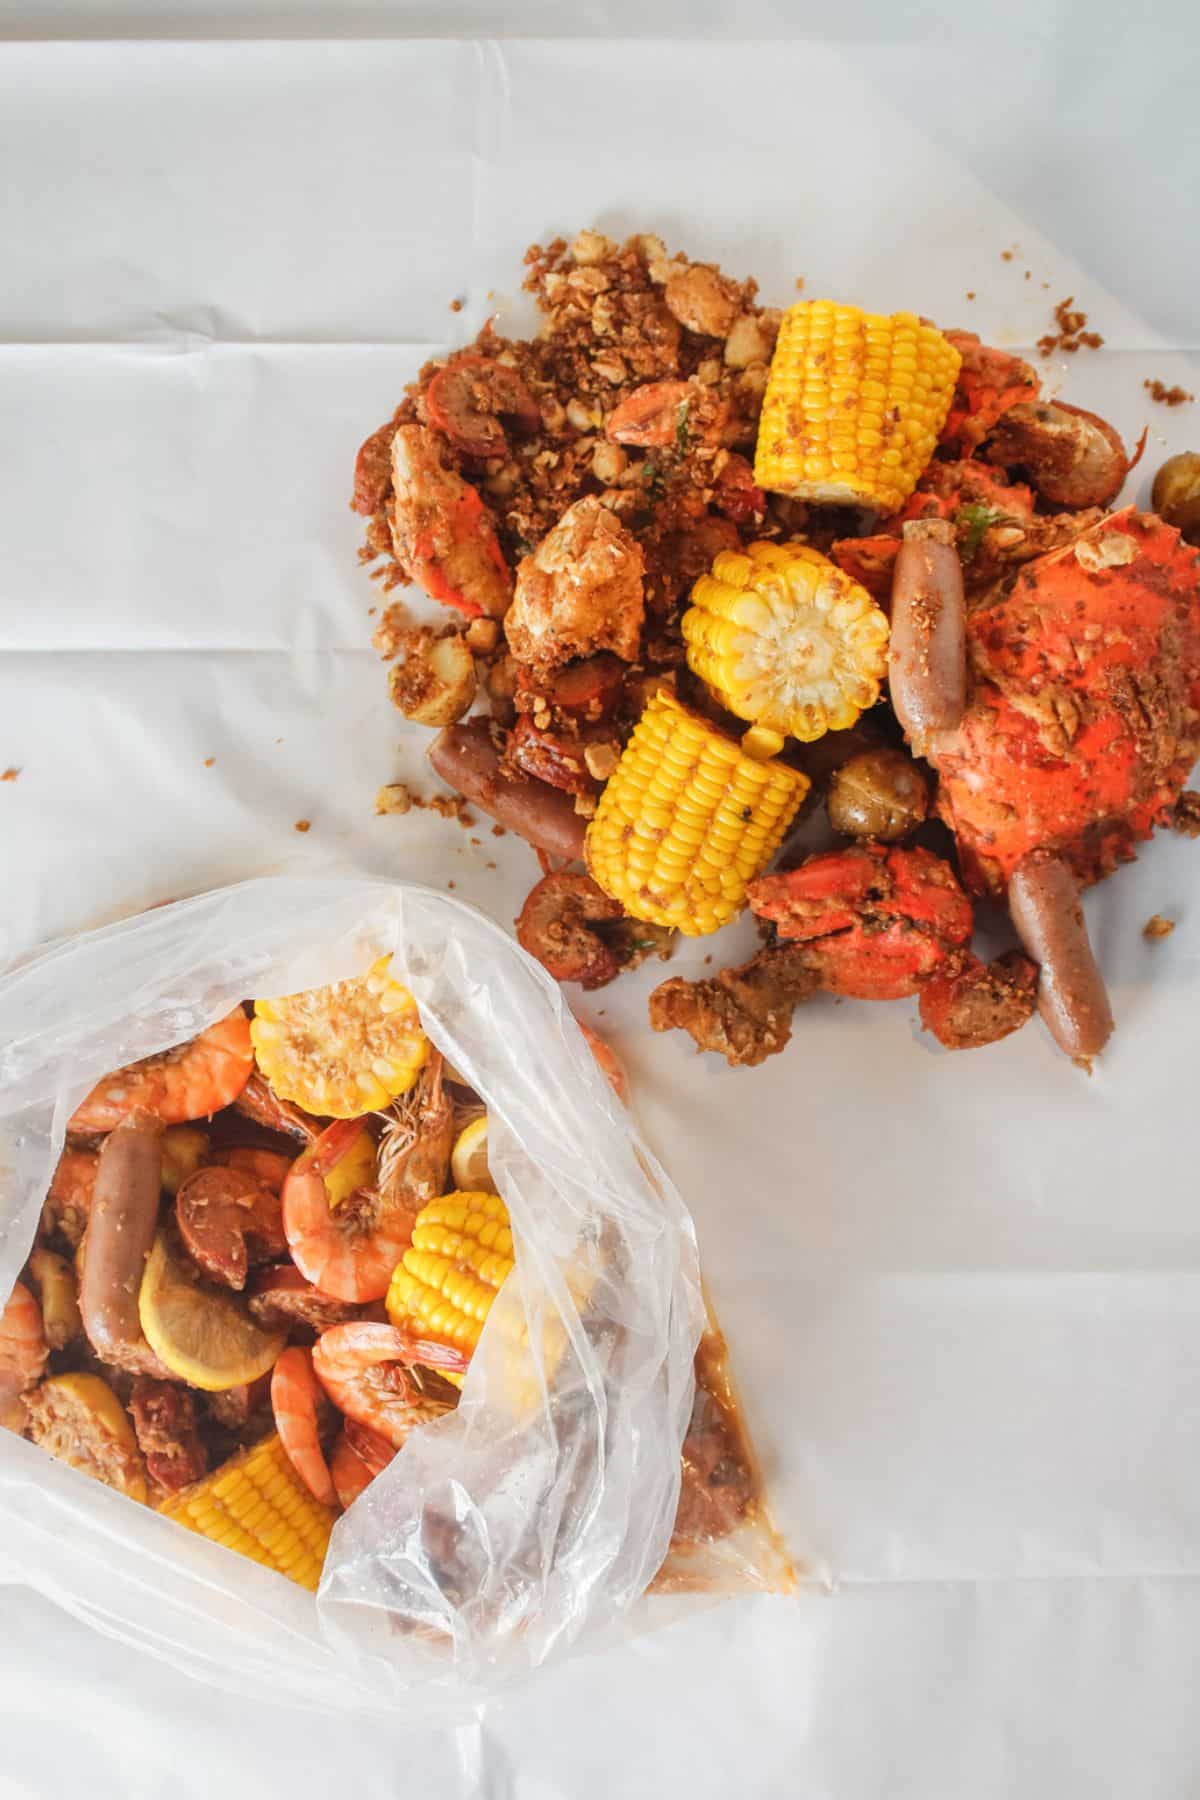 https://www.cleaneatingkitchen.com/wp-content/uploads/2022/06/crab-boil-with-corn-cajun.jpg